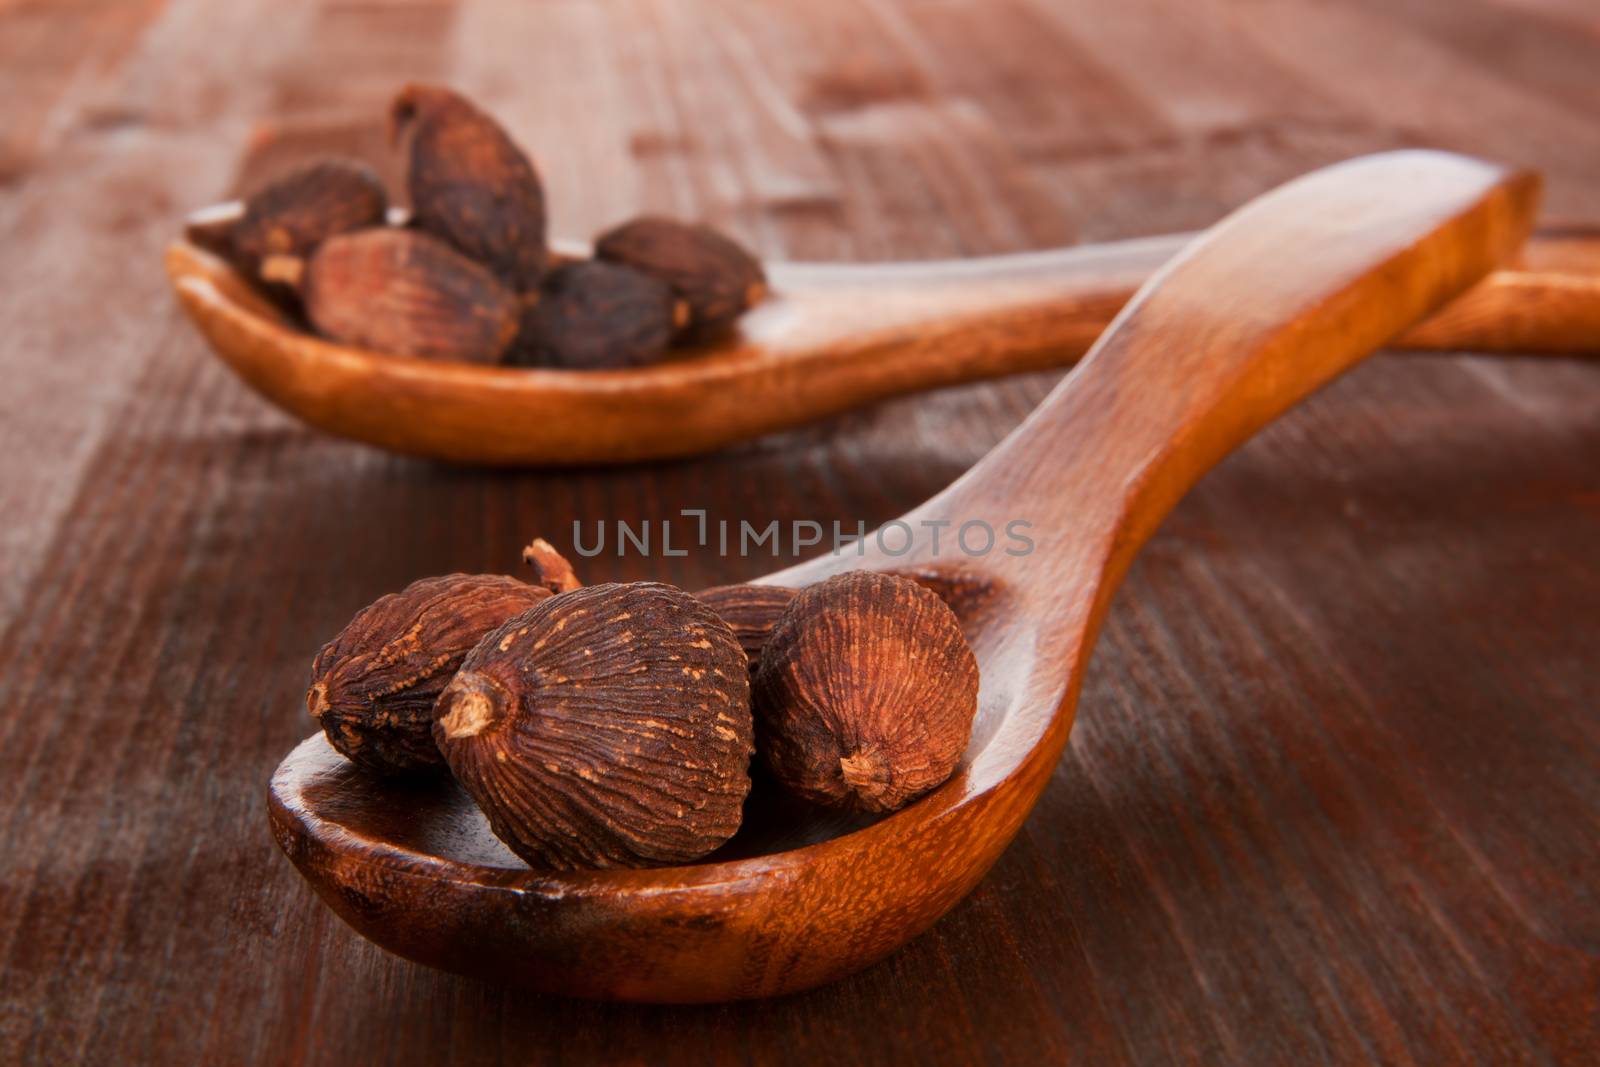 Nutmegs on wooden spoon on dark wooden background. Culinary nuts concept.